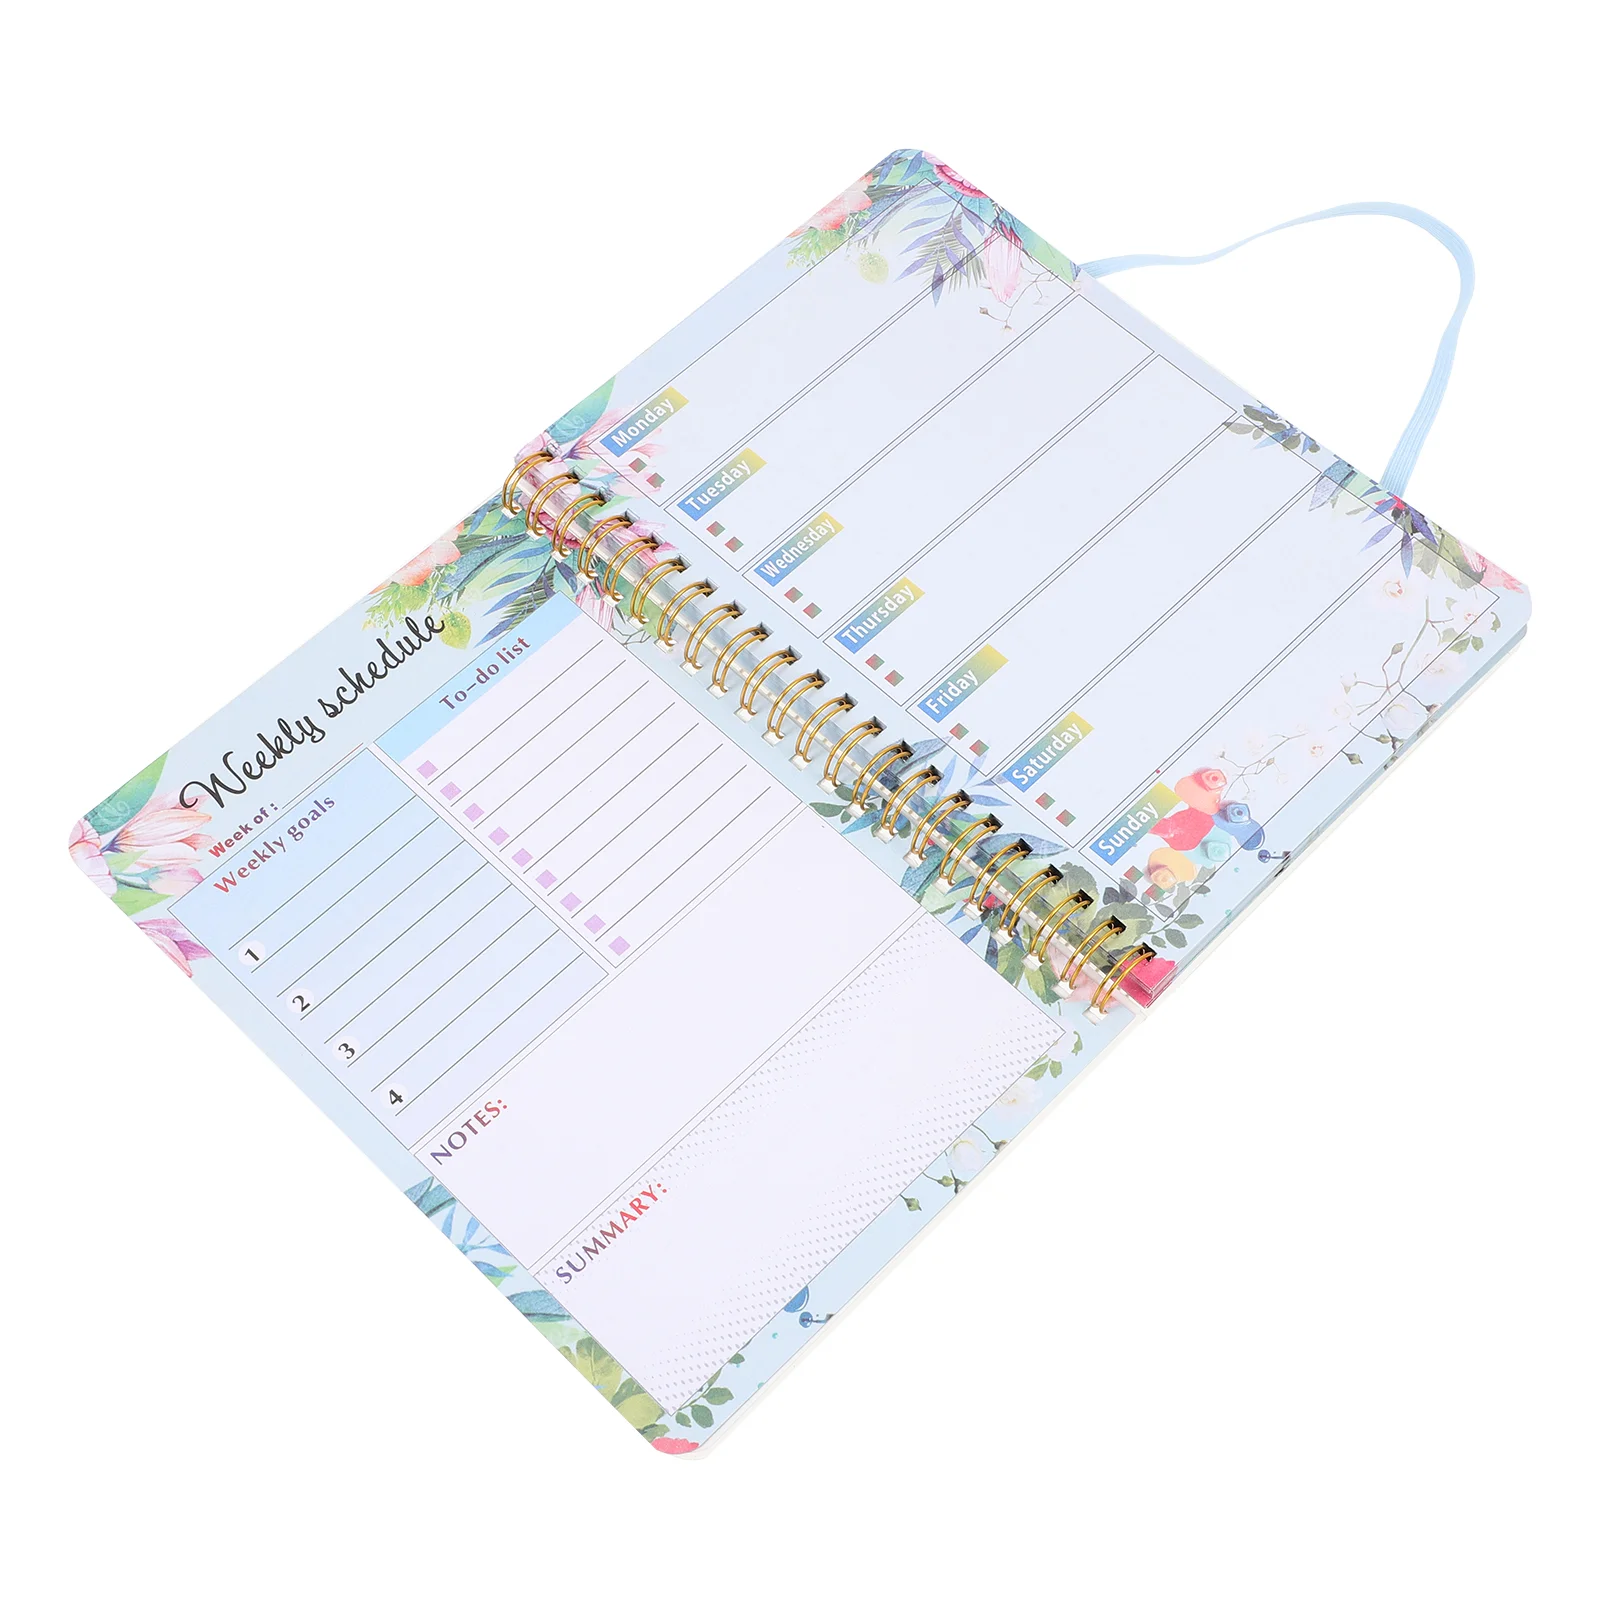 

Planner Notebook Schedule Spiral Book Daily Notepad Weekly Journal Calendar Monthly Appointment Do List Agenda Diary Pocket